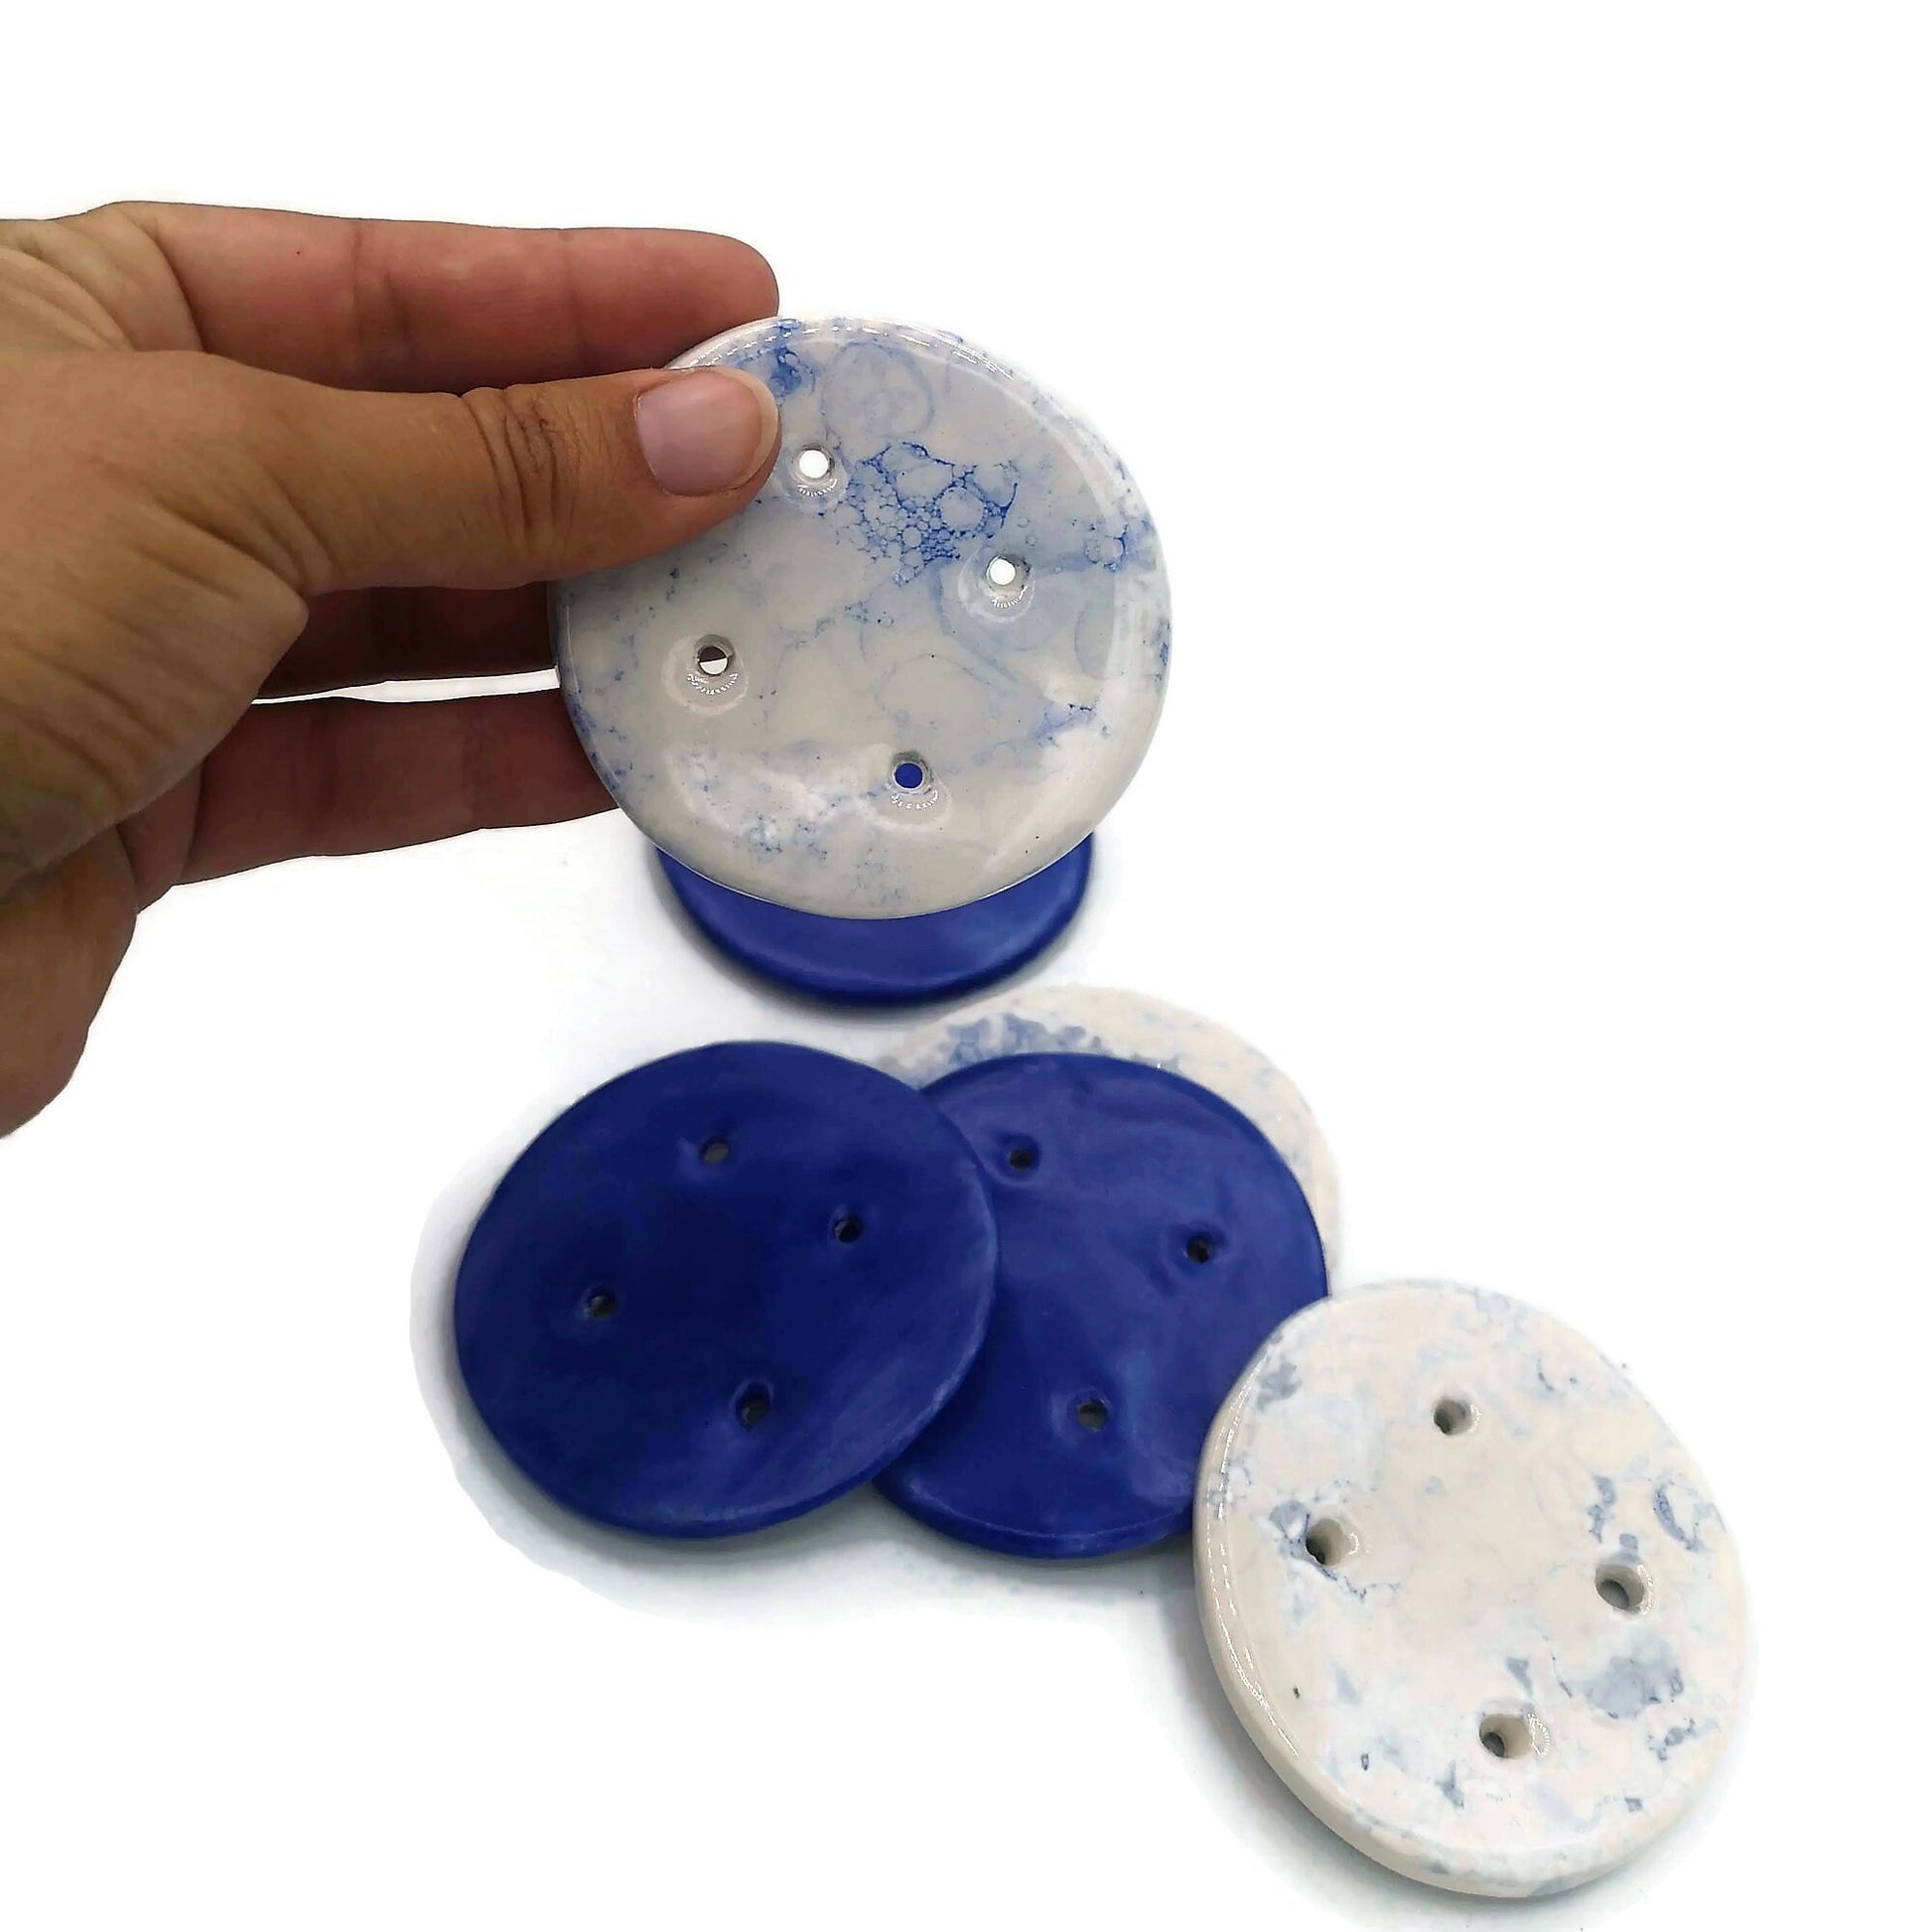 6Pc Extra Large Handmade Ceramic Blue Buttons, Round Shape Assorted Sewing Buttons 65mm, Best Gifts For Her, Novelty Buttons Lot - Ceramica Ana Rafael